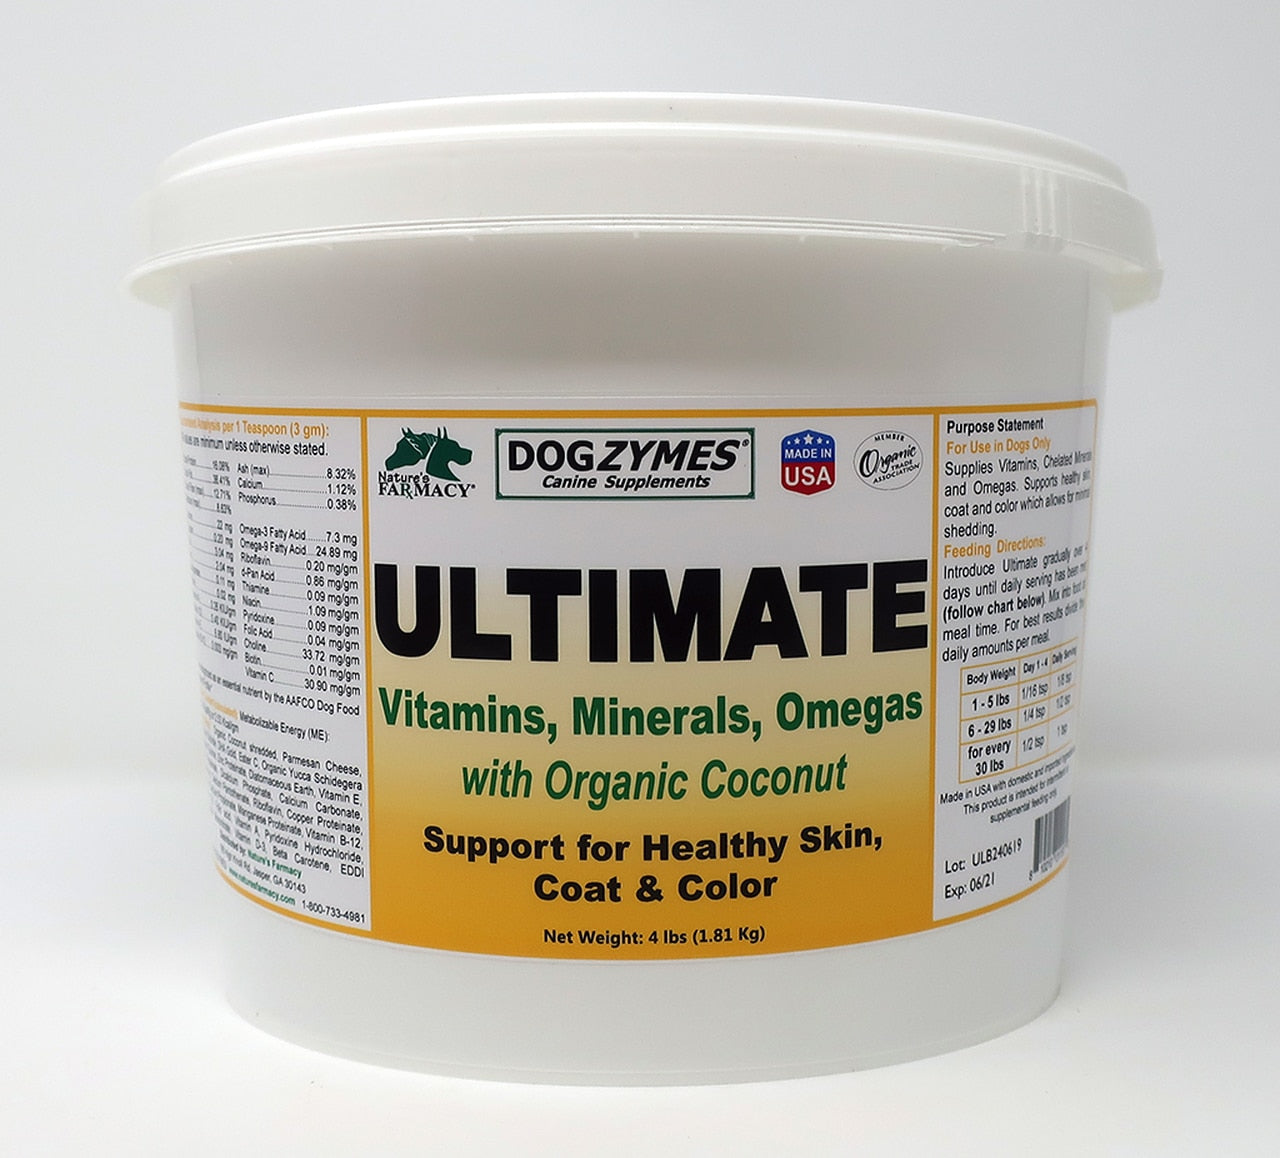 Nature's Farmacy Dogzymes Ultimate Vitamin Supplement For Dogs